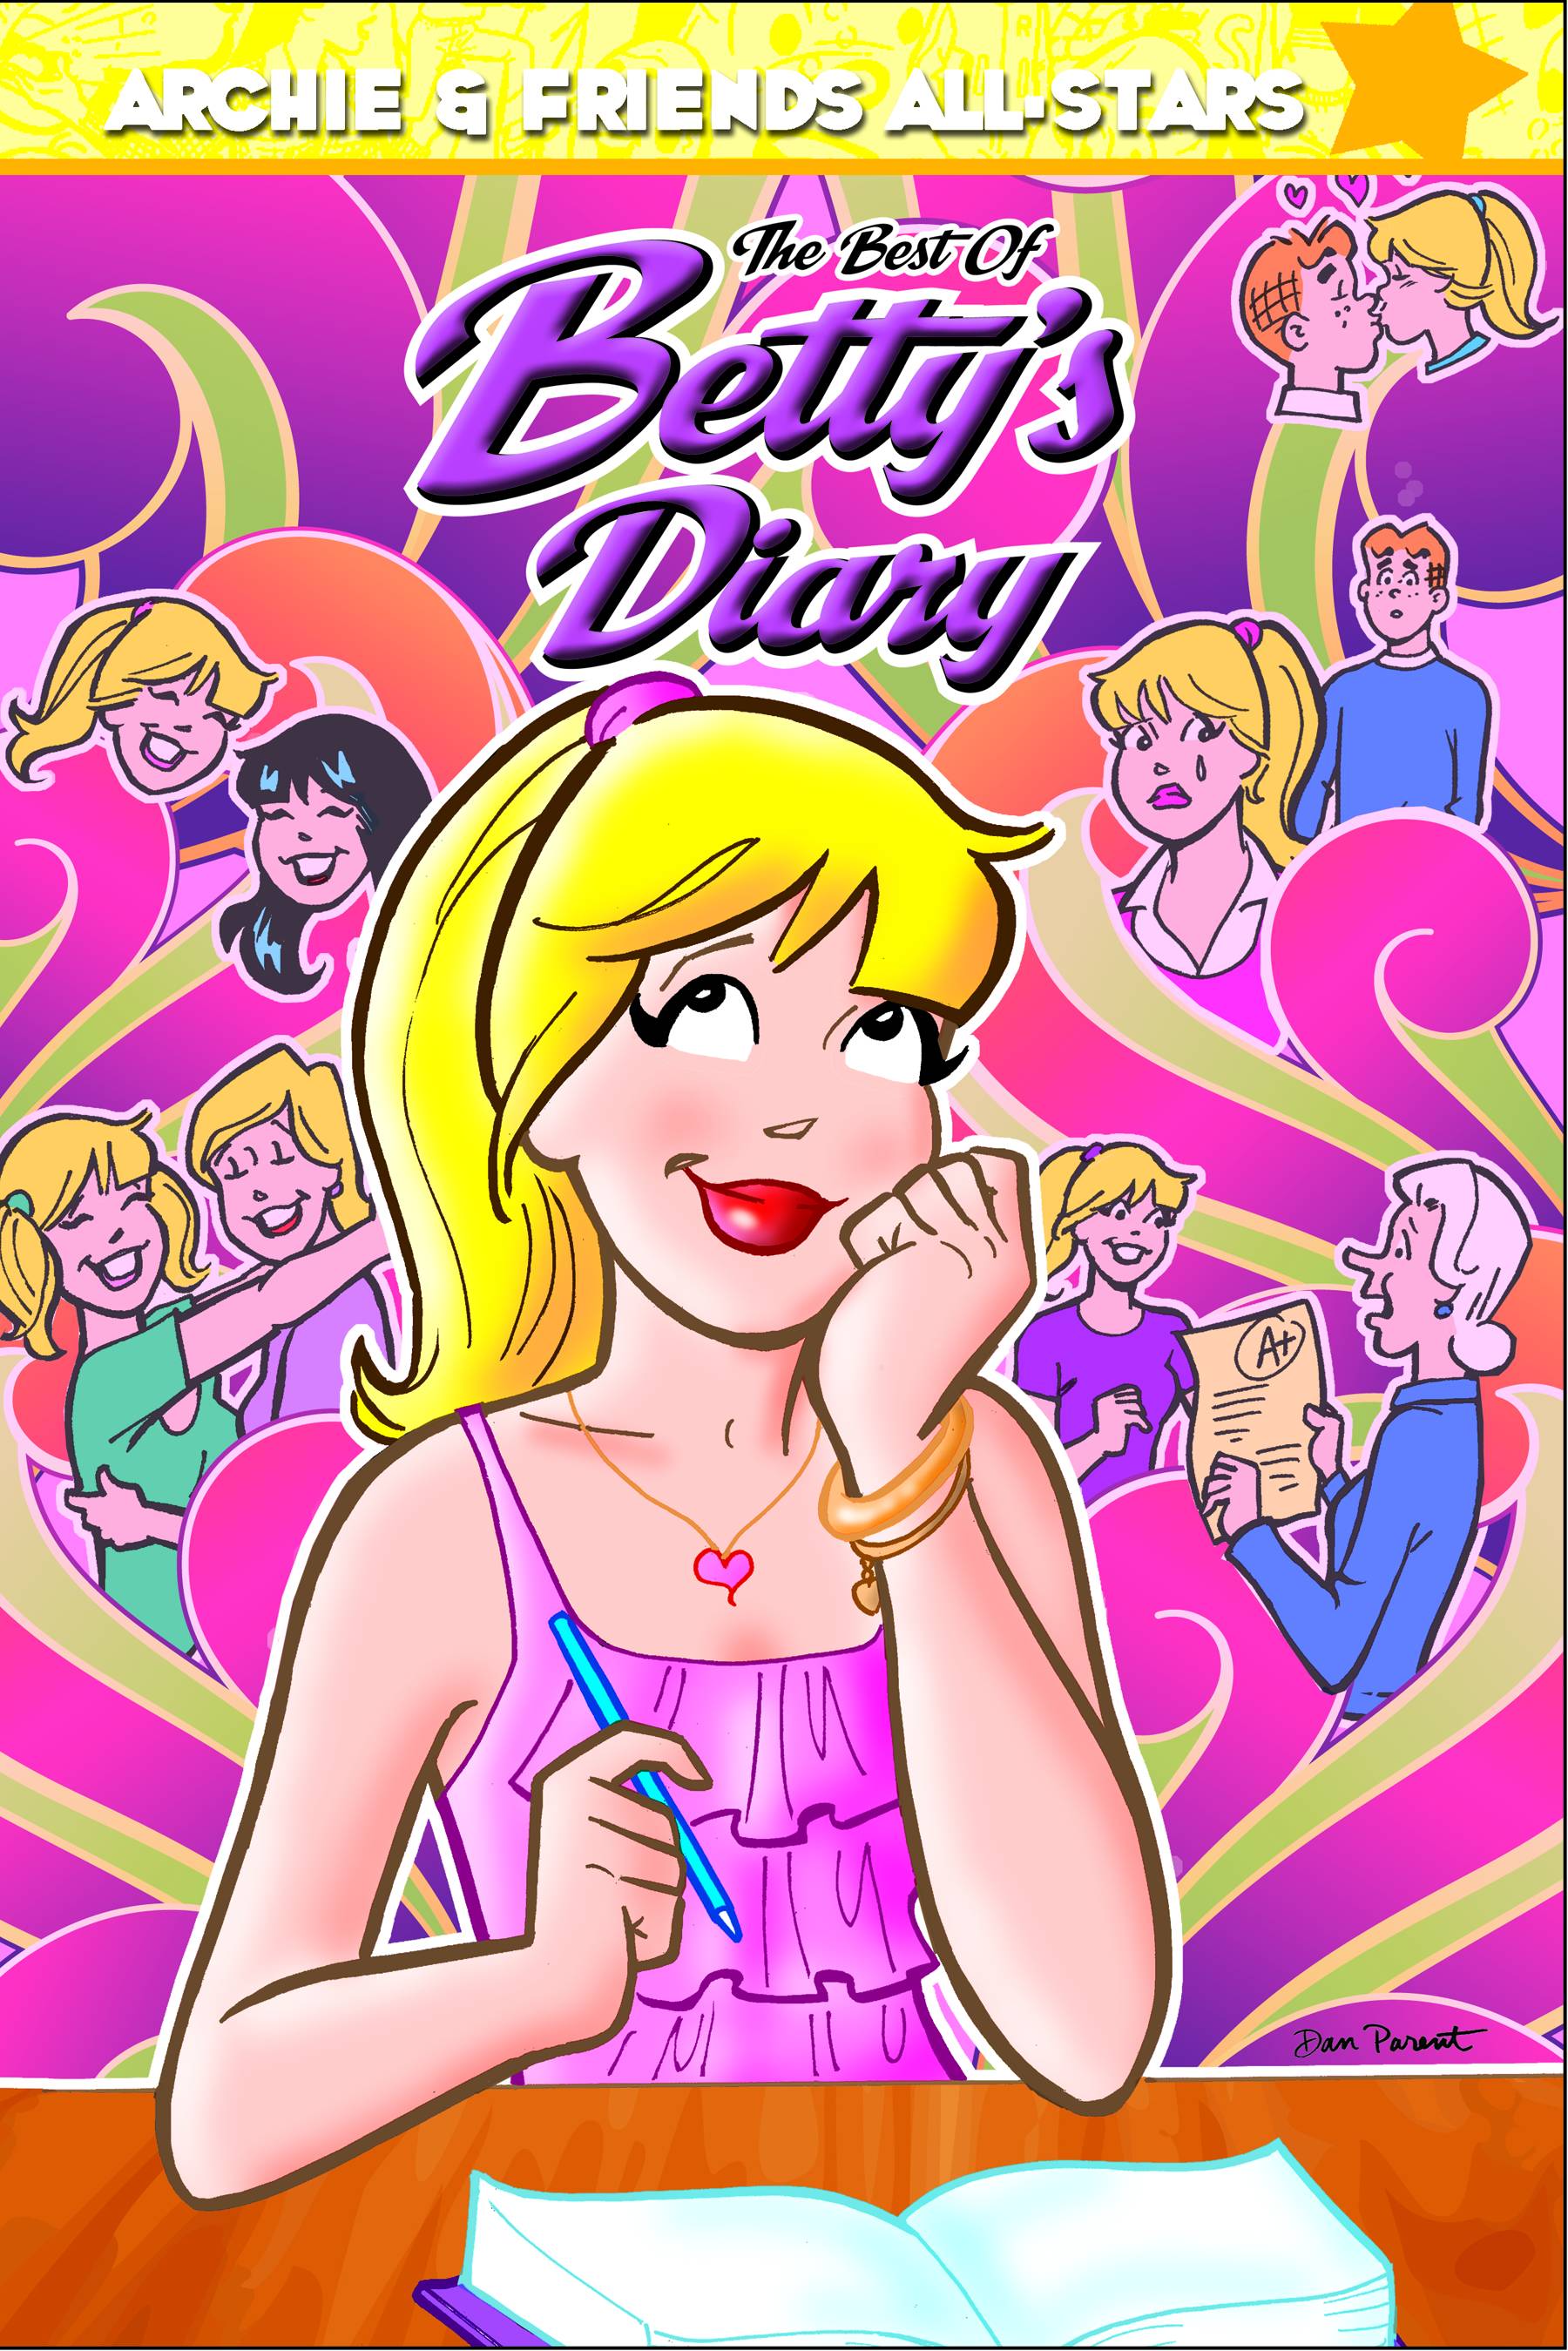 Archie & Friends Graphic Novel Volume 2 Bettys Diary